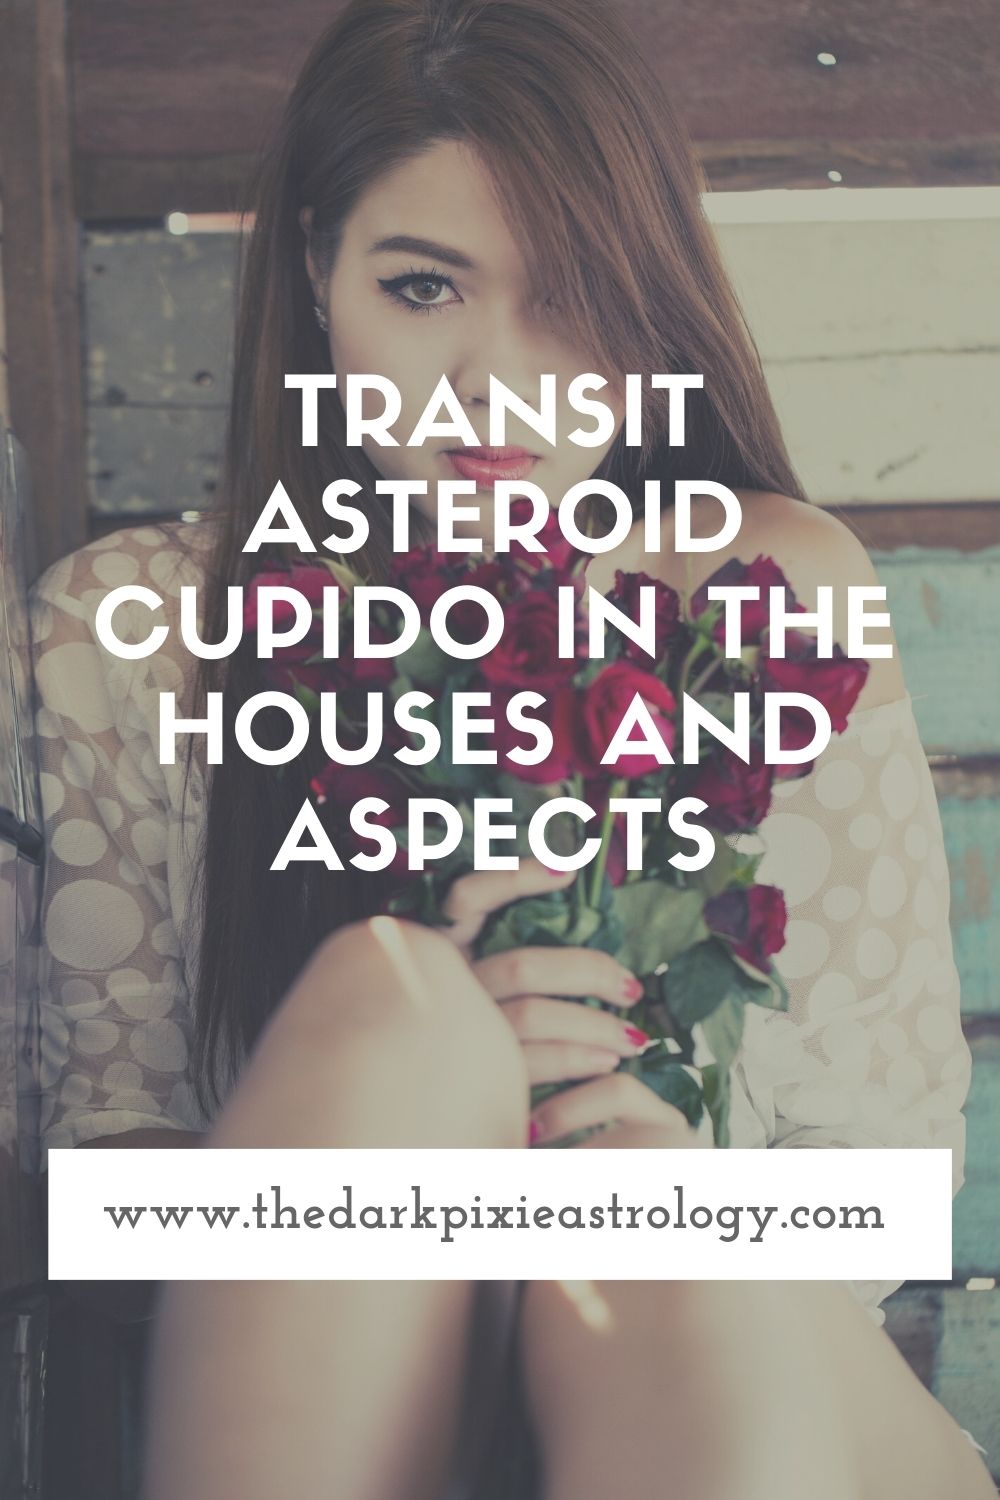 Transit Asteroid Cupido in the Houses and Aspects - The Dark Pixie Astrology